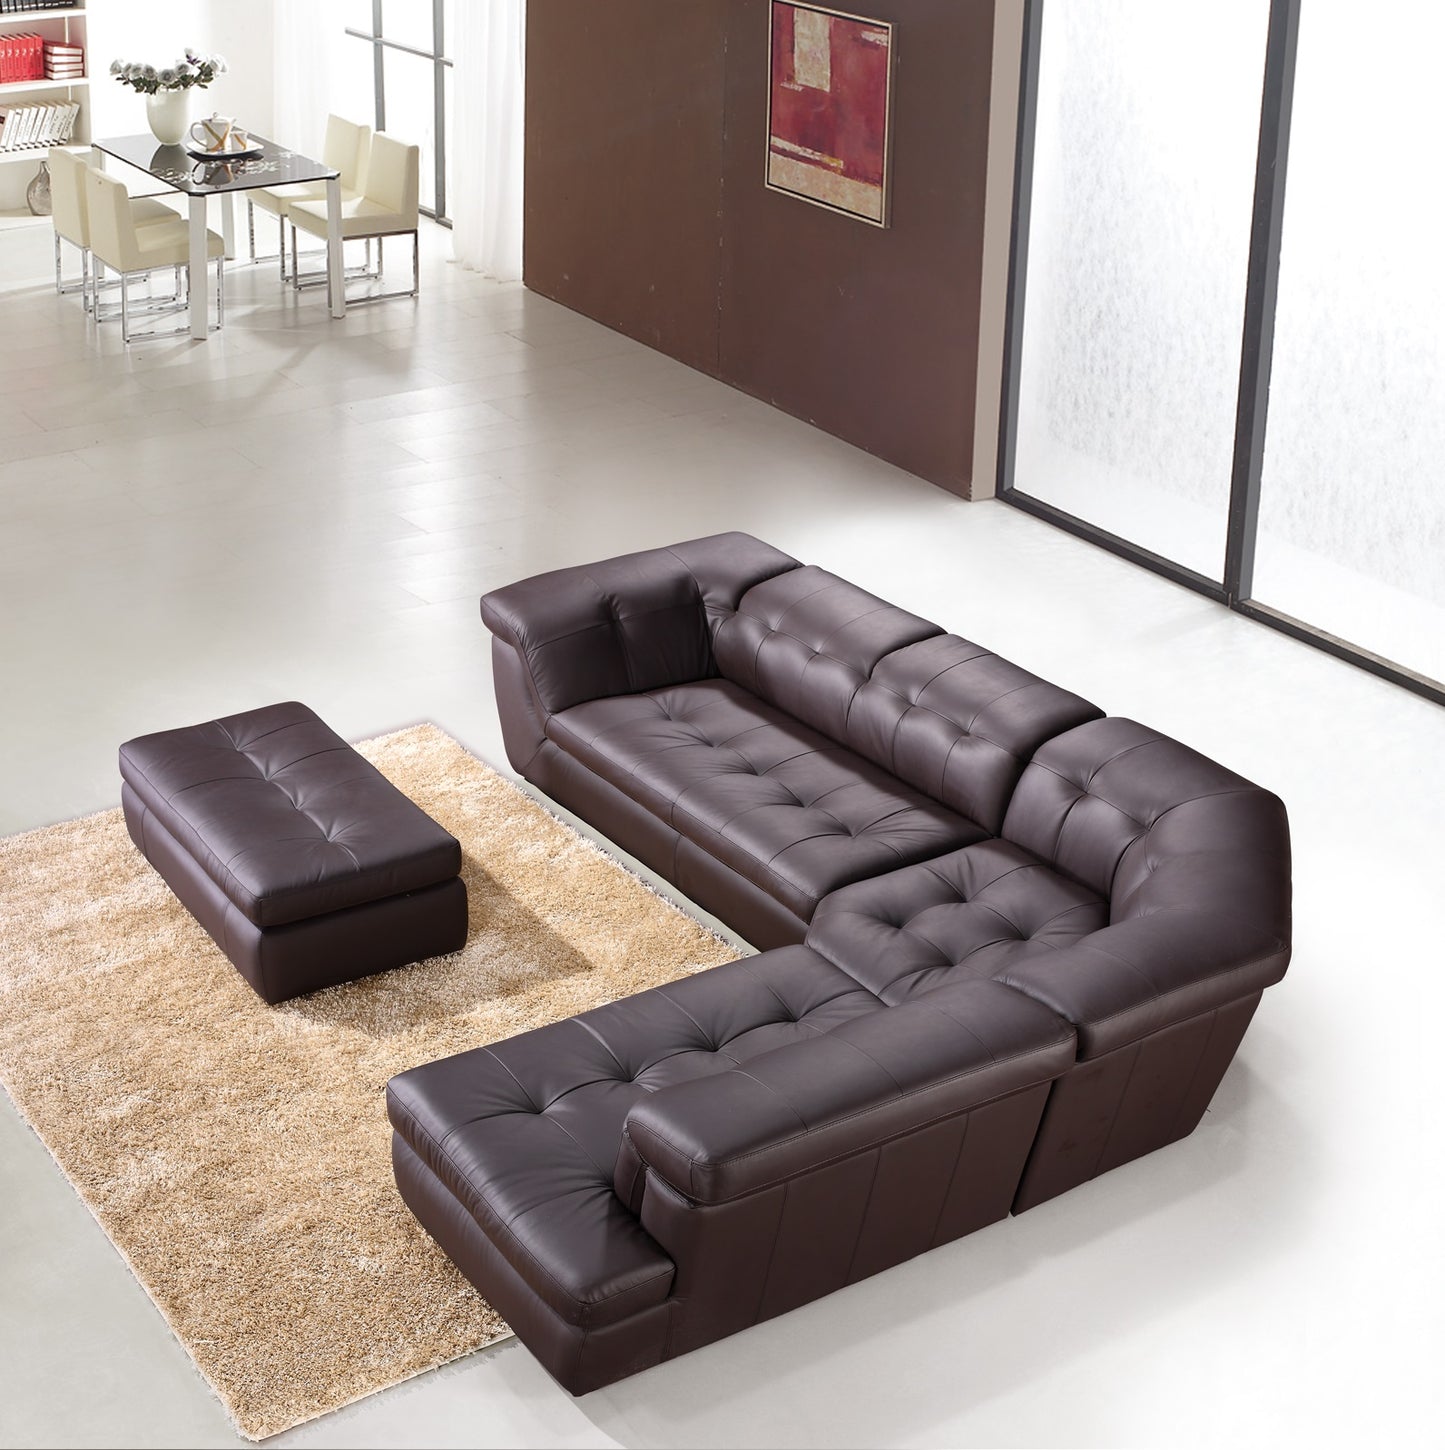 397 Italian Leather Sectional Sofa Chocolate Color RHF by JM